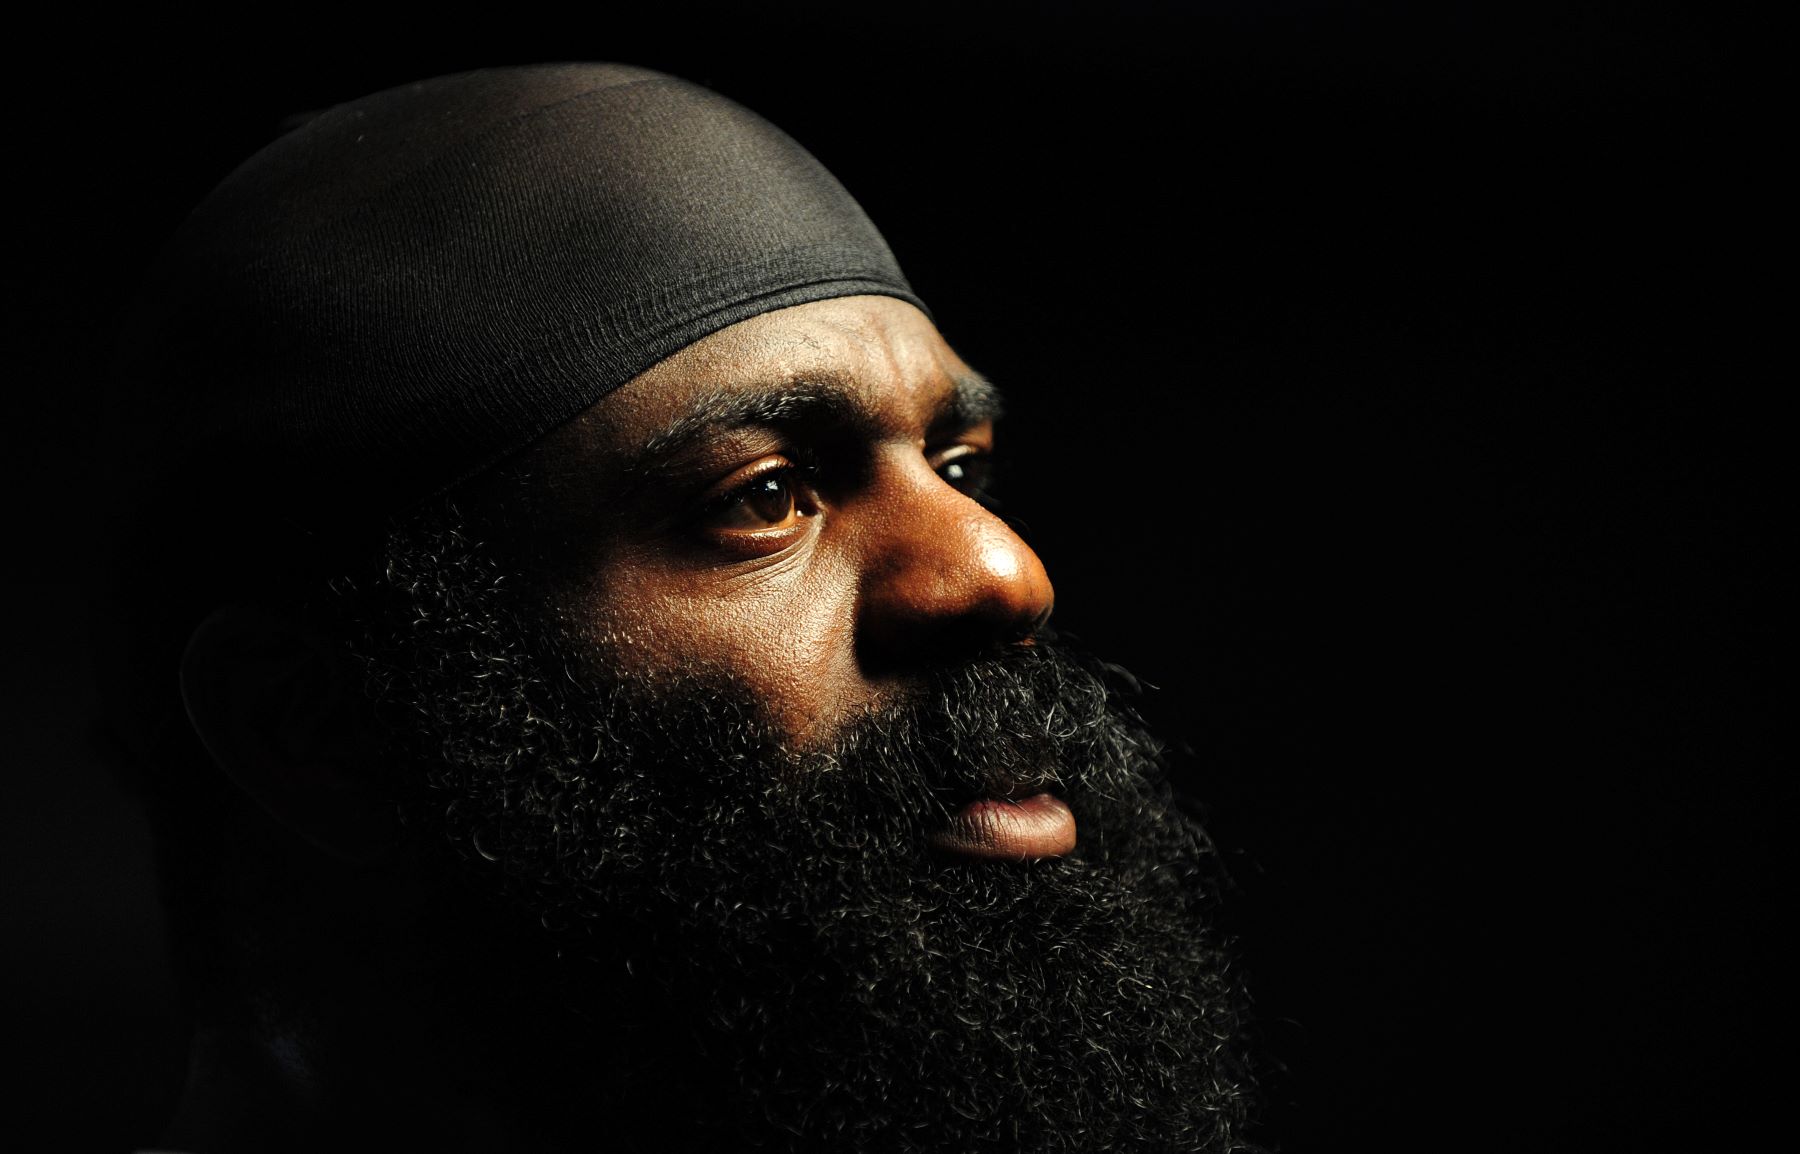 How Much Was Kimbo Slice Worth at the Time He Died?